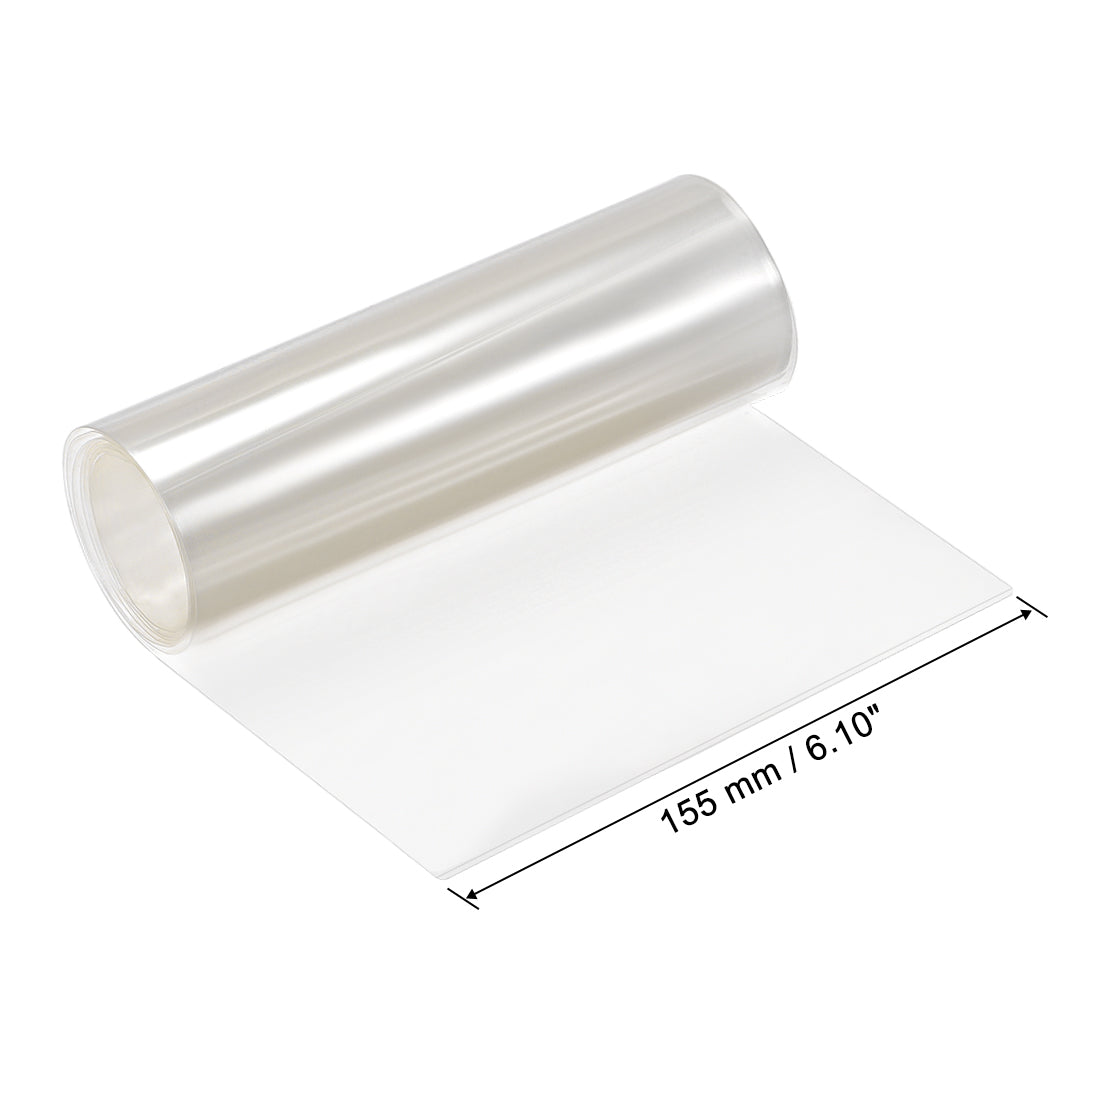 Uxcell Uxcell PVC Heat Shrink Tube 155mm Flat Width Wrap for Dual Layer 1 Meter Clear